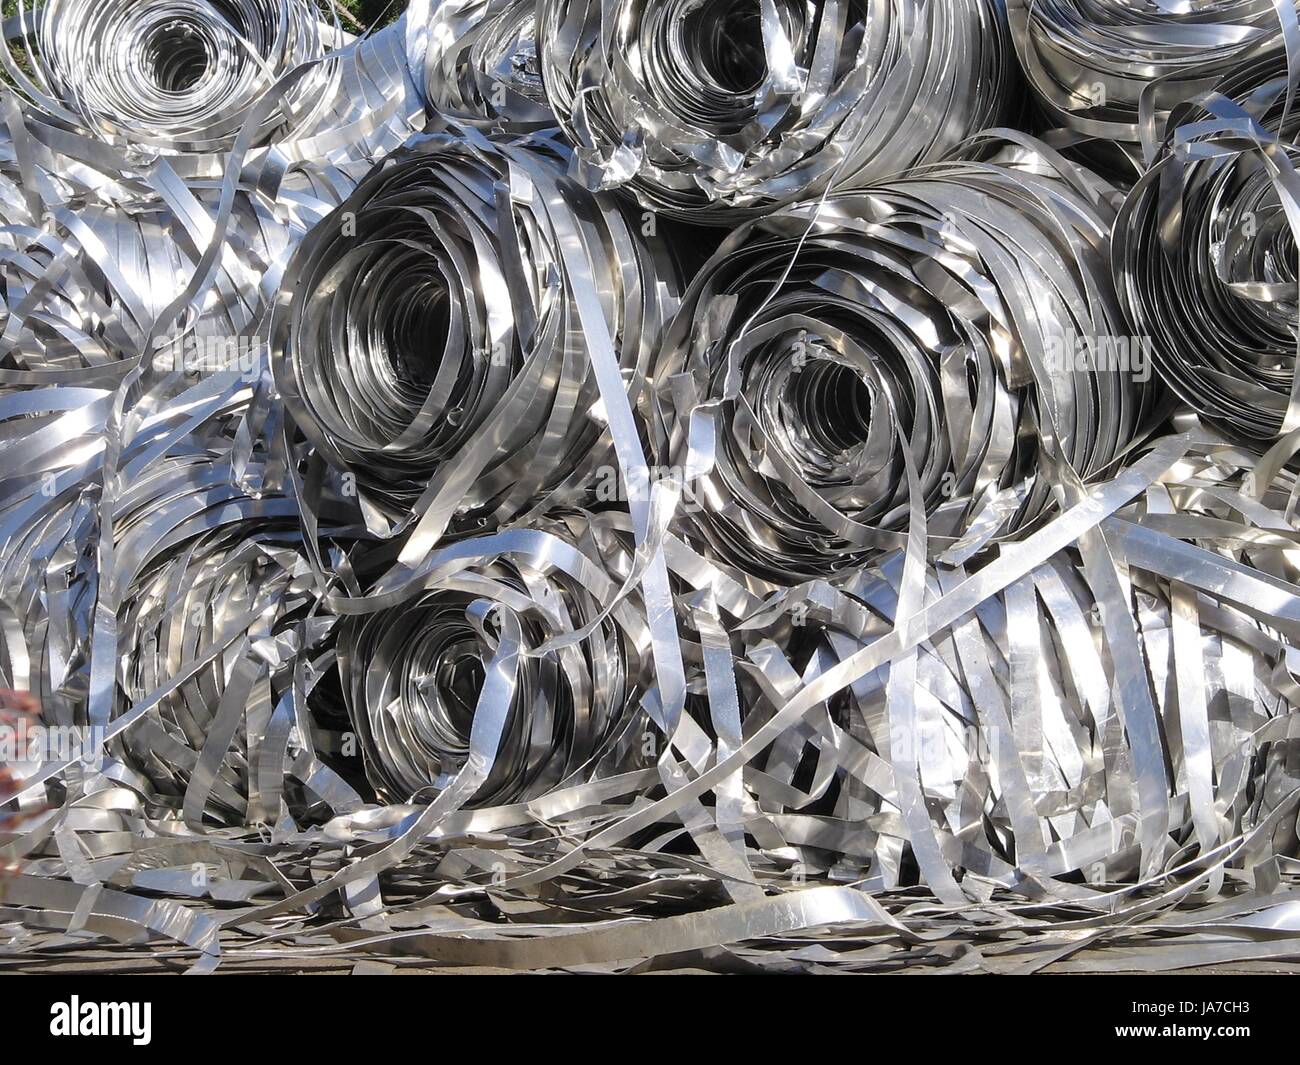 Aluminum scrap tapes for recycling. Stock Photo